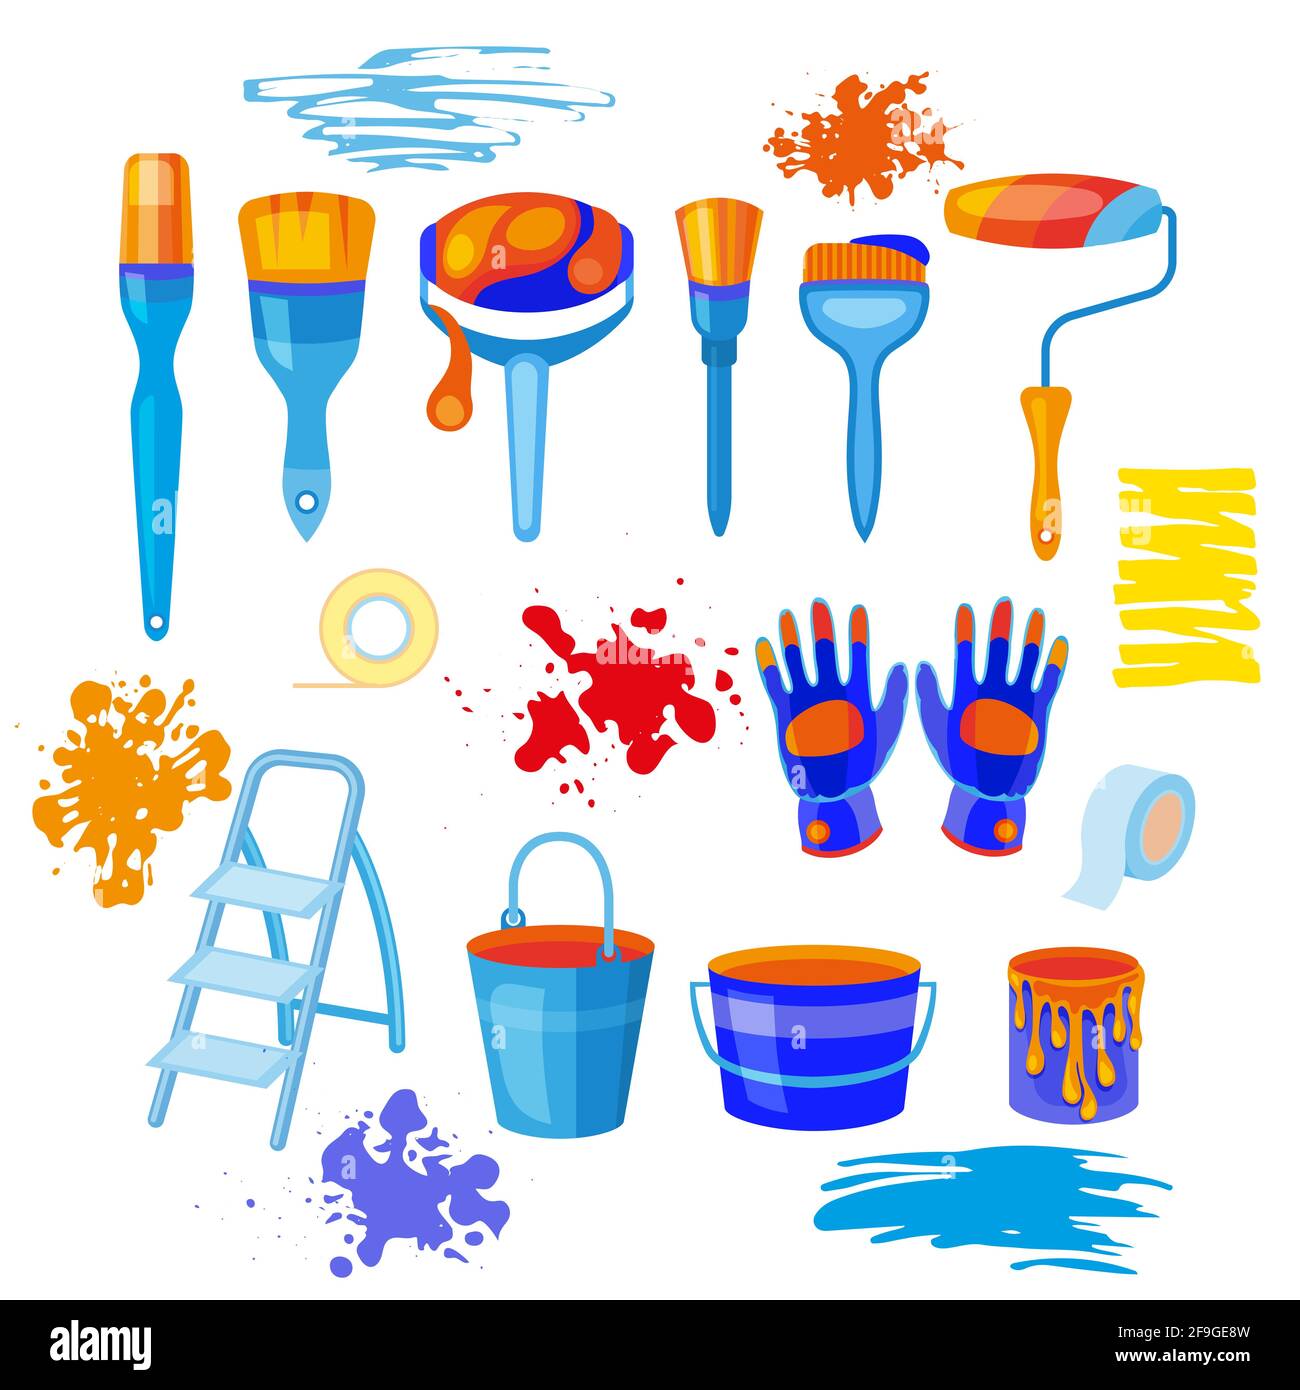 Flat working tools icon set, building object, implements and worker stuff. Stock Vector